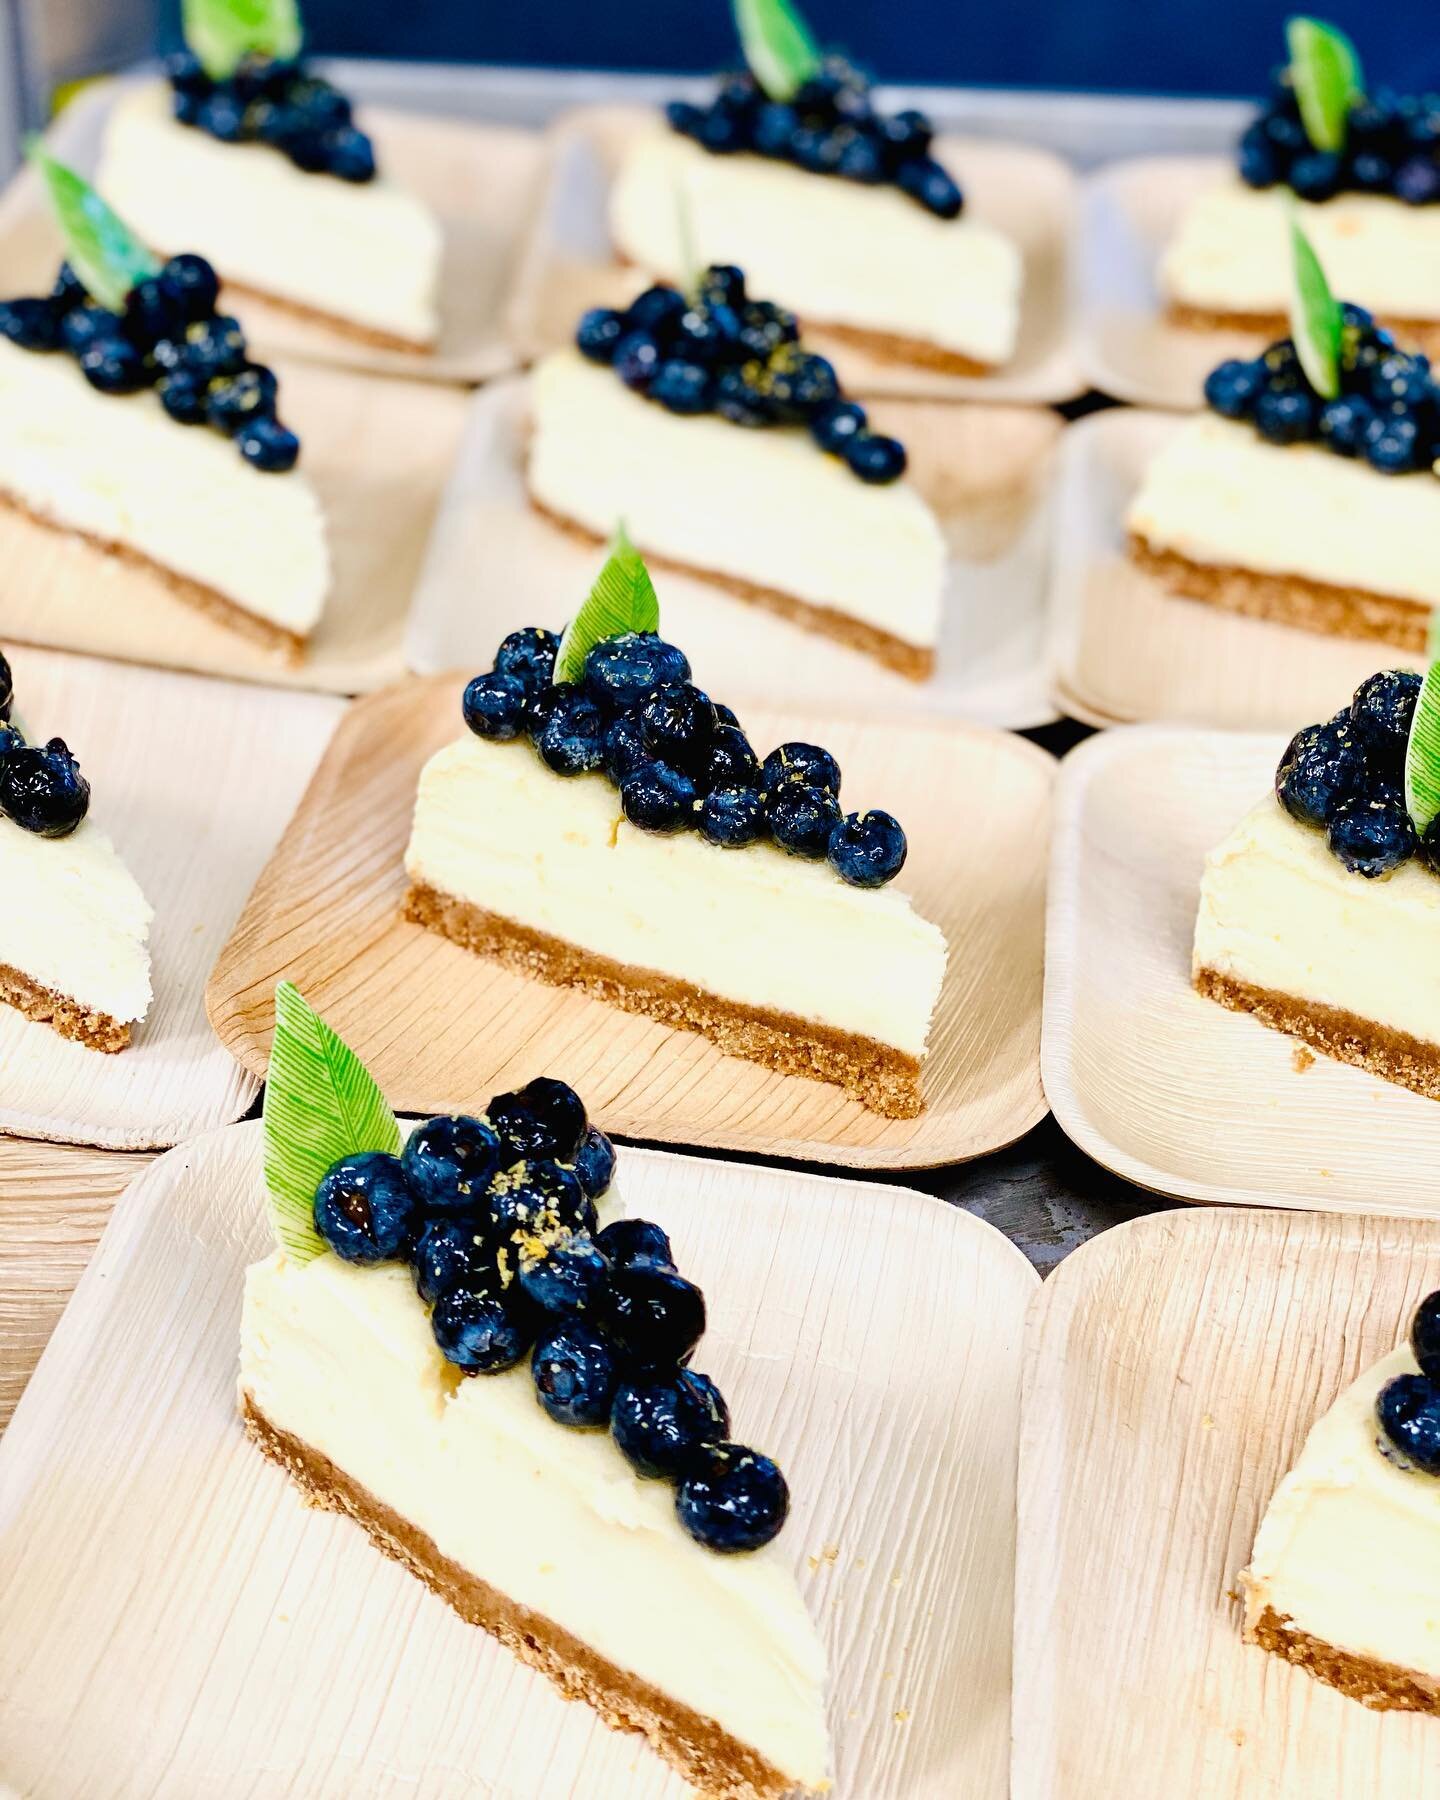 We are huge fans of a big, beautiful, and creamy cheesecake. What makes it even more enjoyable is that it&rsquo;s a dessert you can customize just as we did here with these juicy blueberries from the market. The possibilities are endless - add season